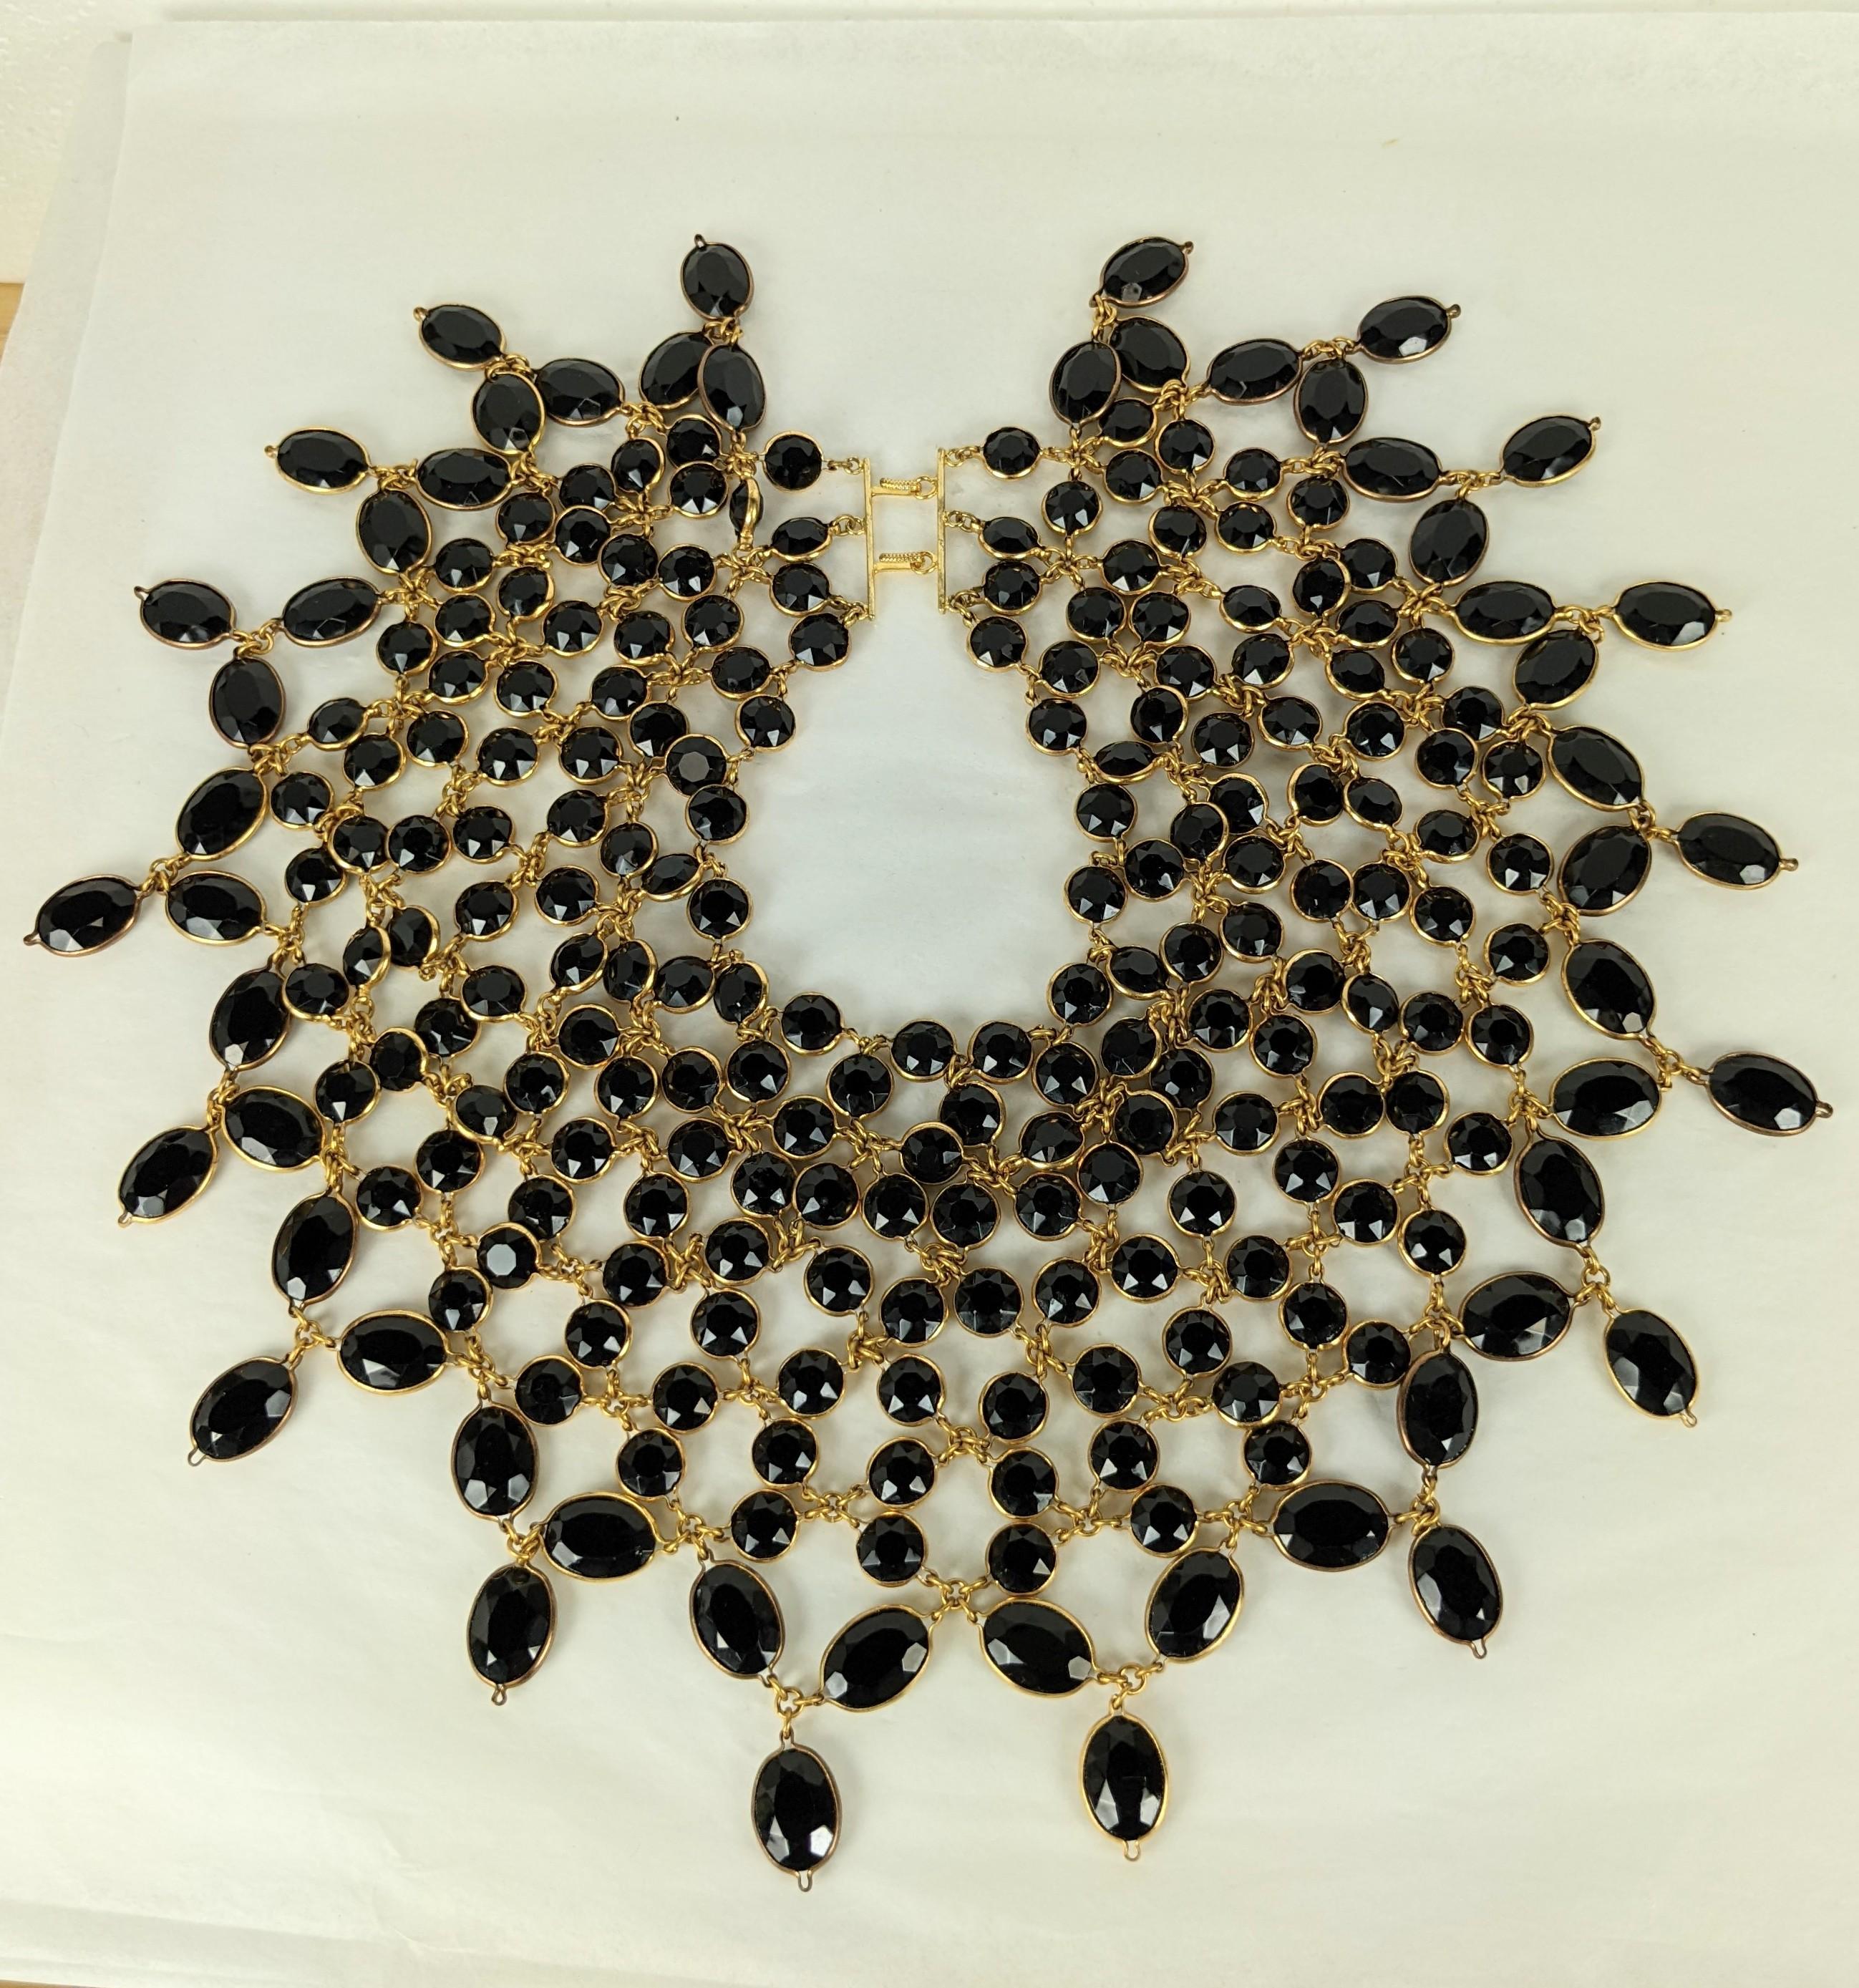 Massive and Extraordinary Hubert de Givenchy Haute Couture Bezel Set Jet Paste Collar, necklace provenance of Bunny Mellon. Created by Roger Jean Pierre the large Egyptian revival styled collar composed of  round and oval collet set and faceted 